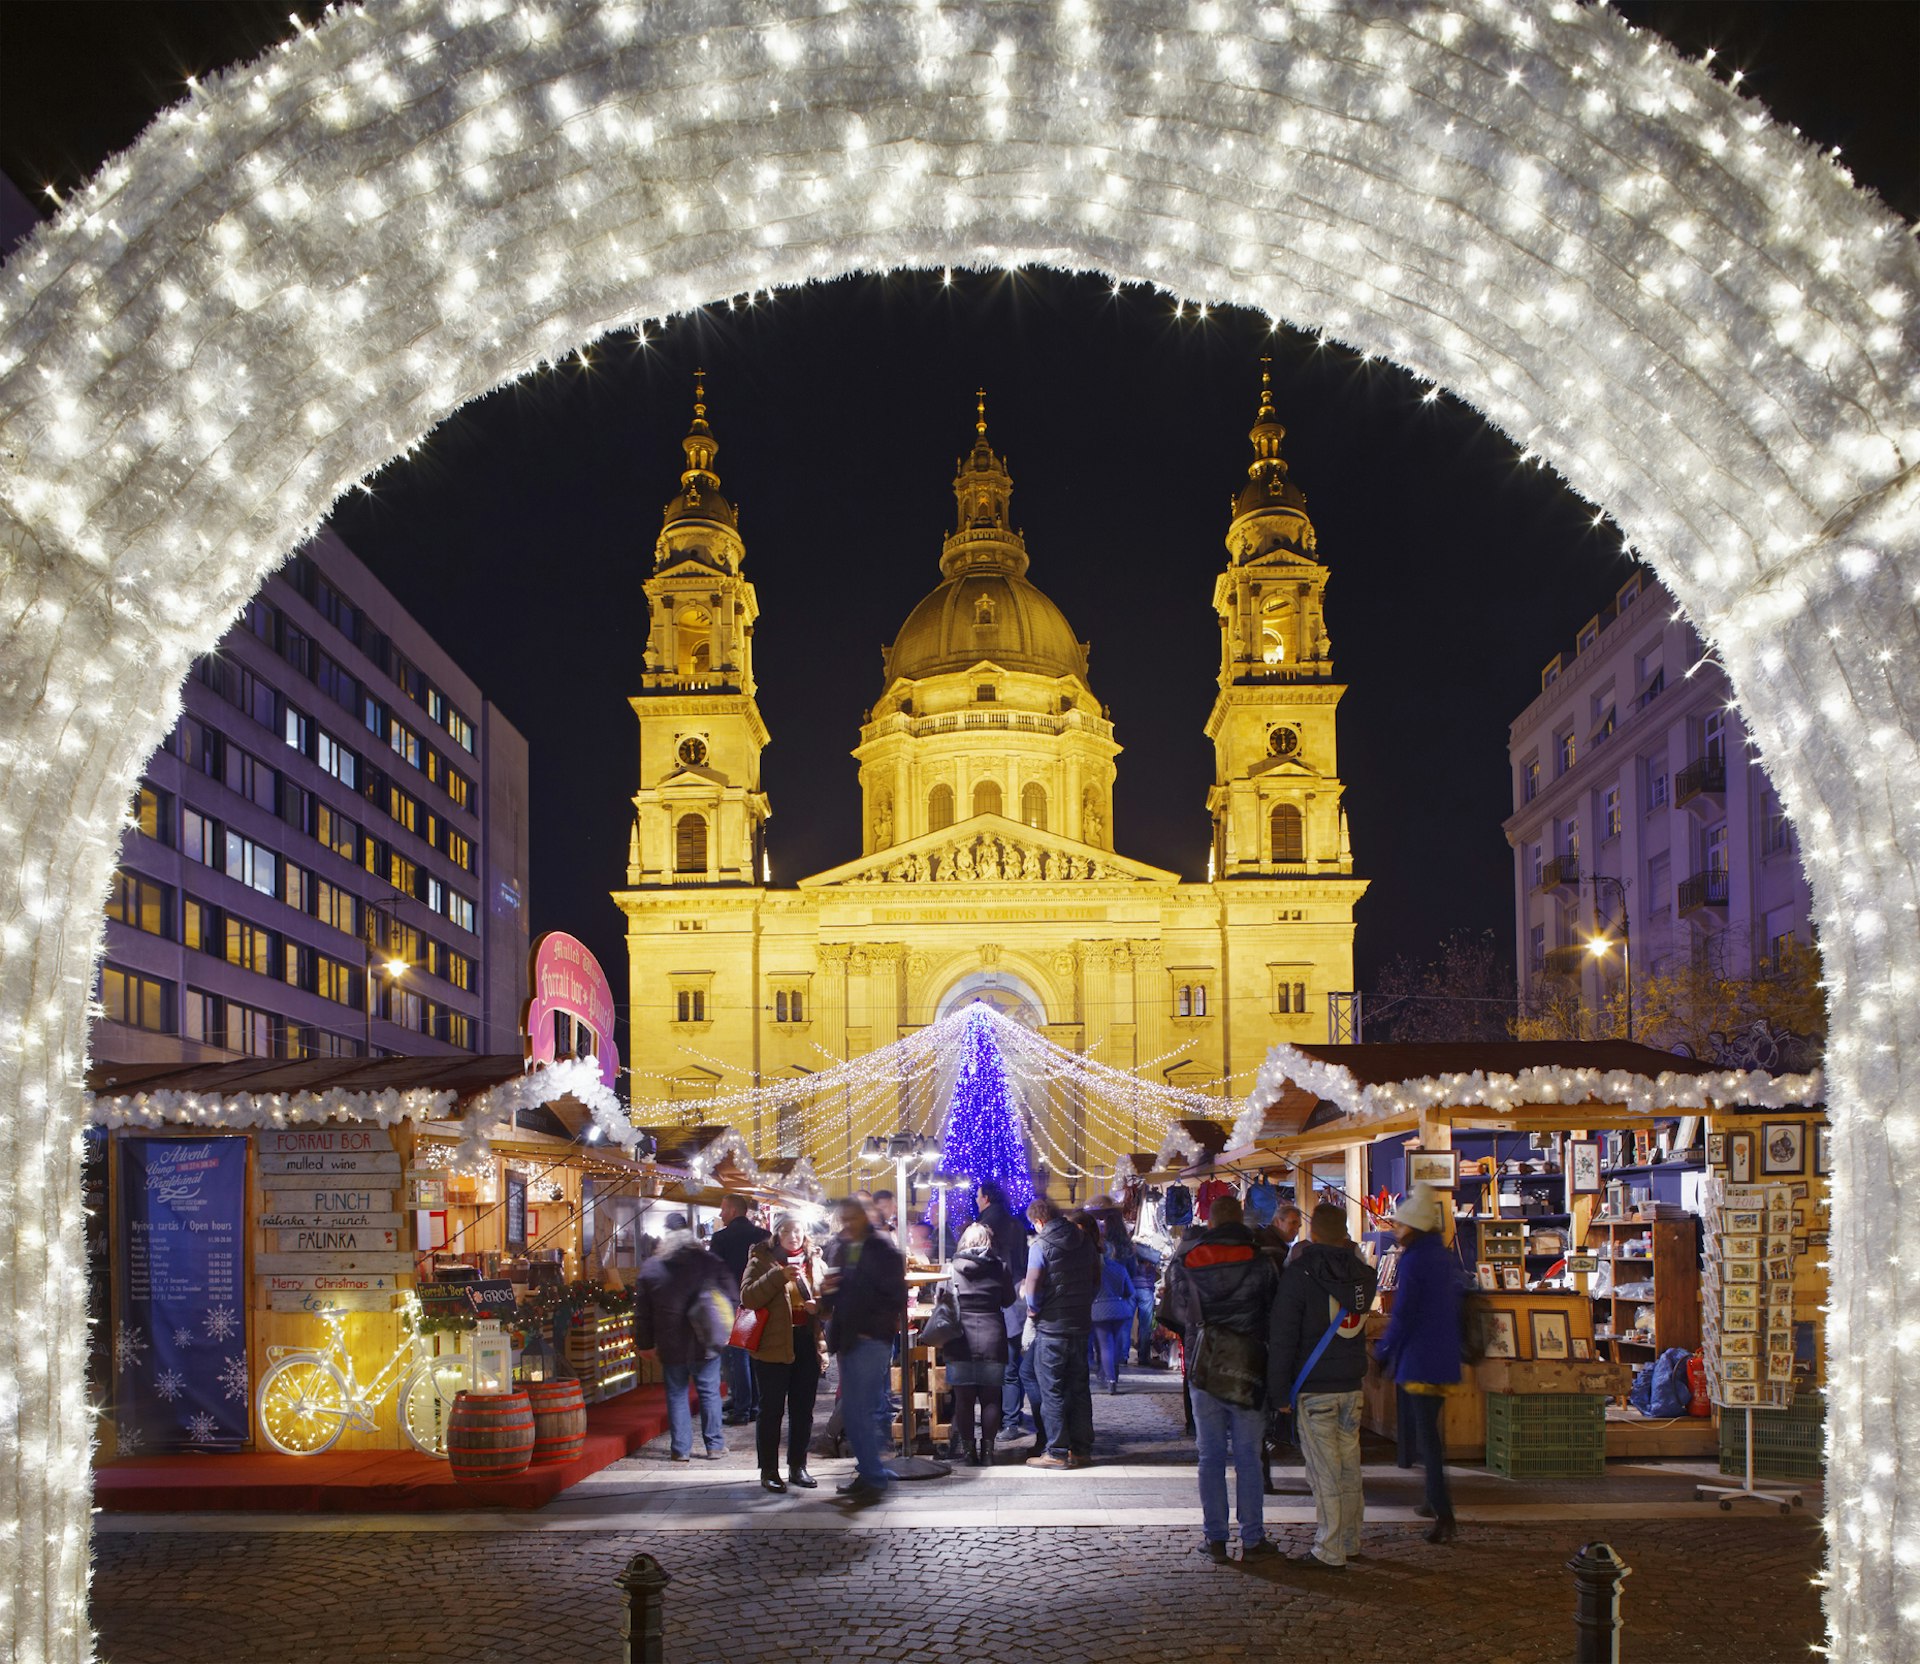 Budapest Christmas market in all its lit-up glory with the Basilica of St Stephen in the background